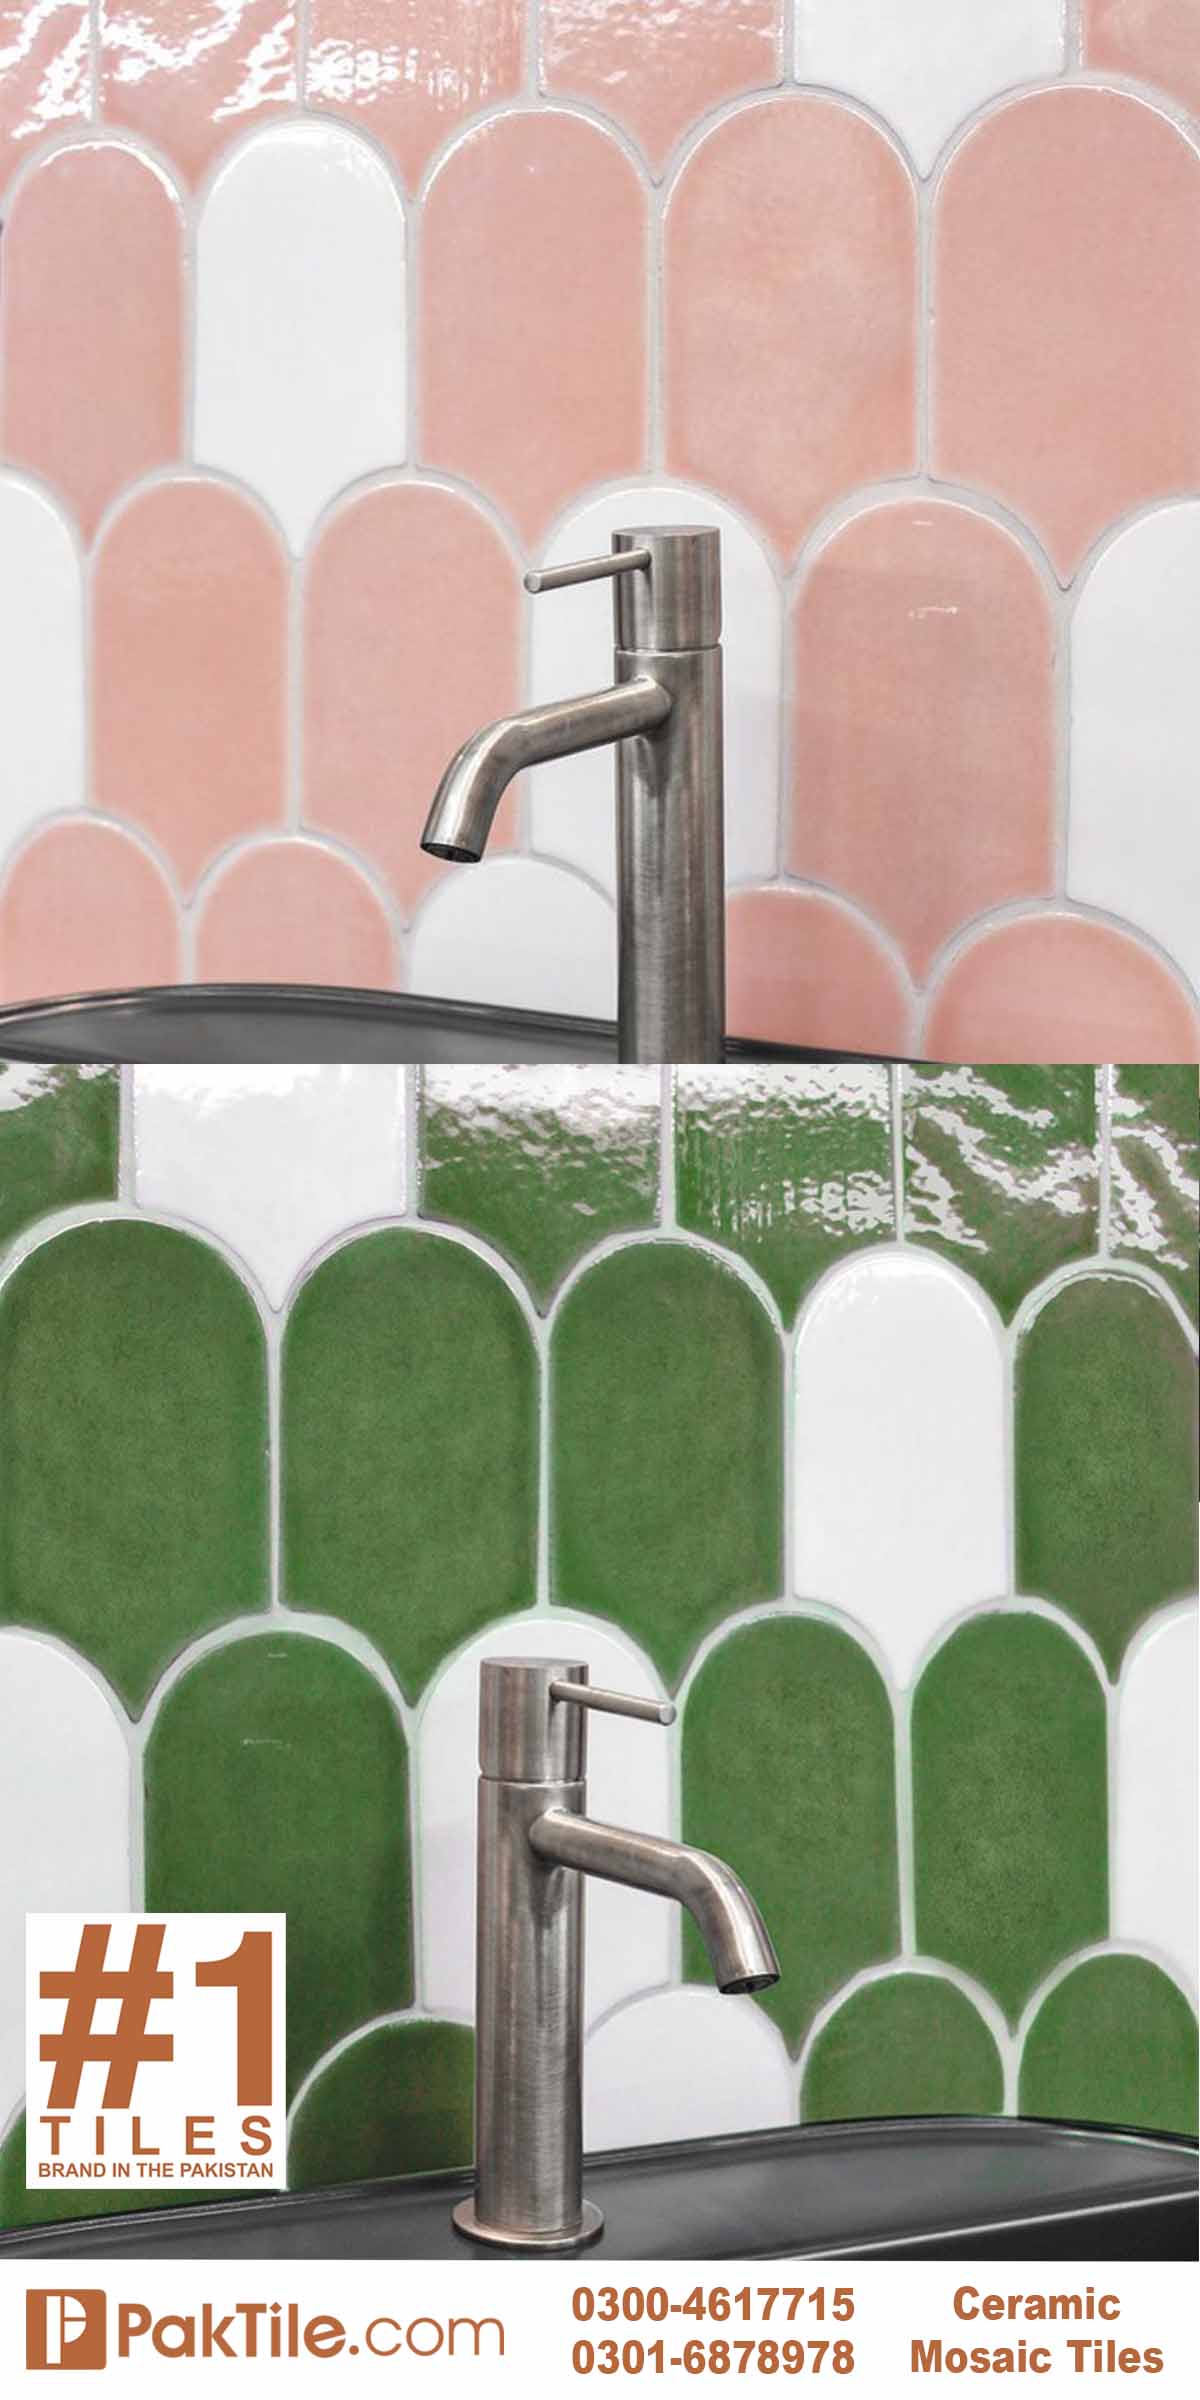 Green Pink and White Glazed Tiles